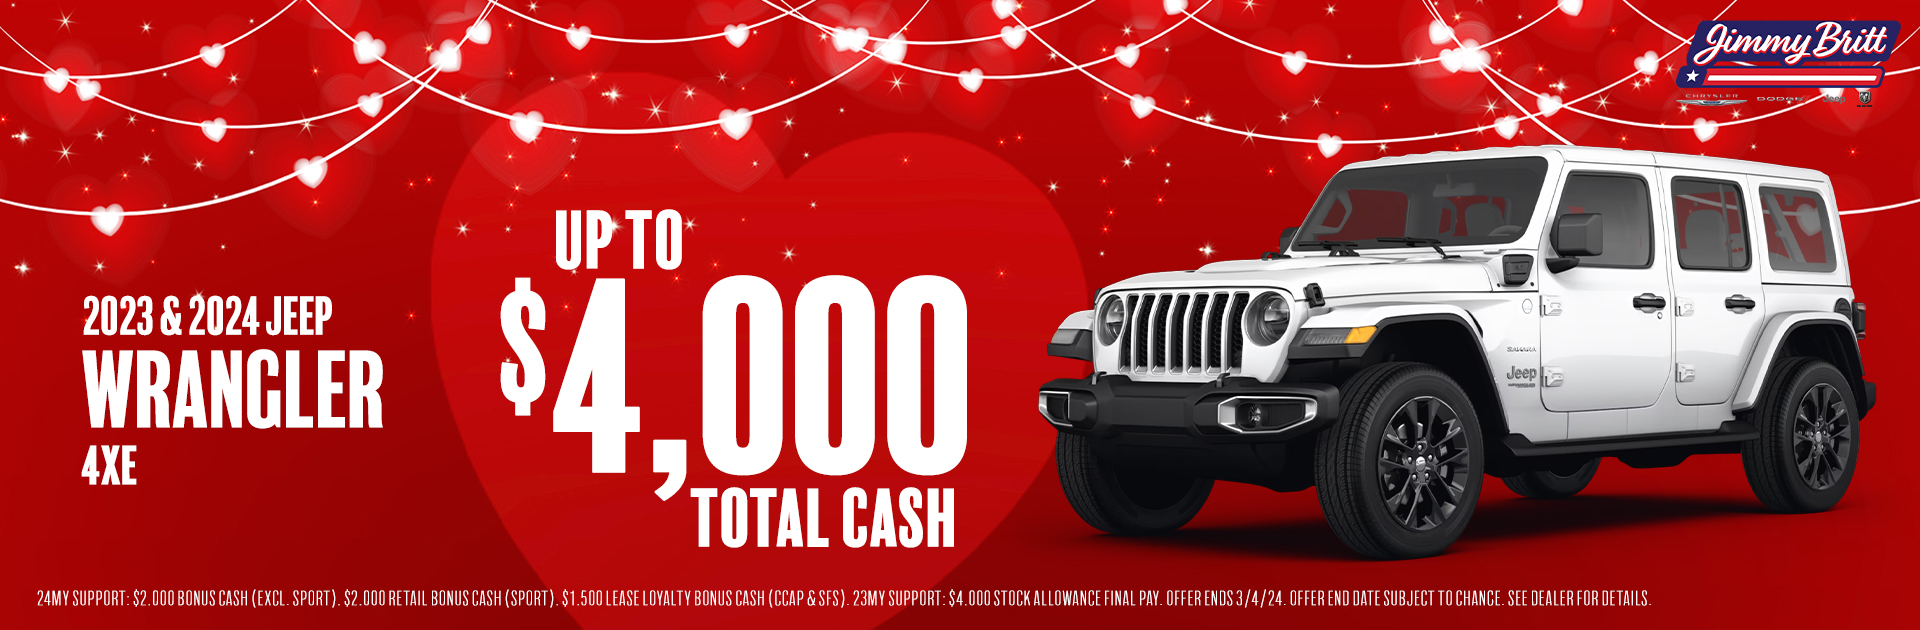 2023 & 2024 Jeep Wrangler 4XE: Up to $4,000 total cash!